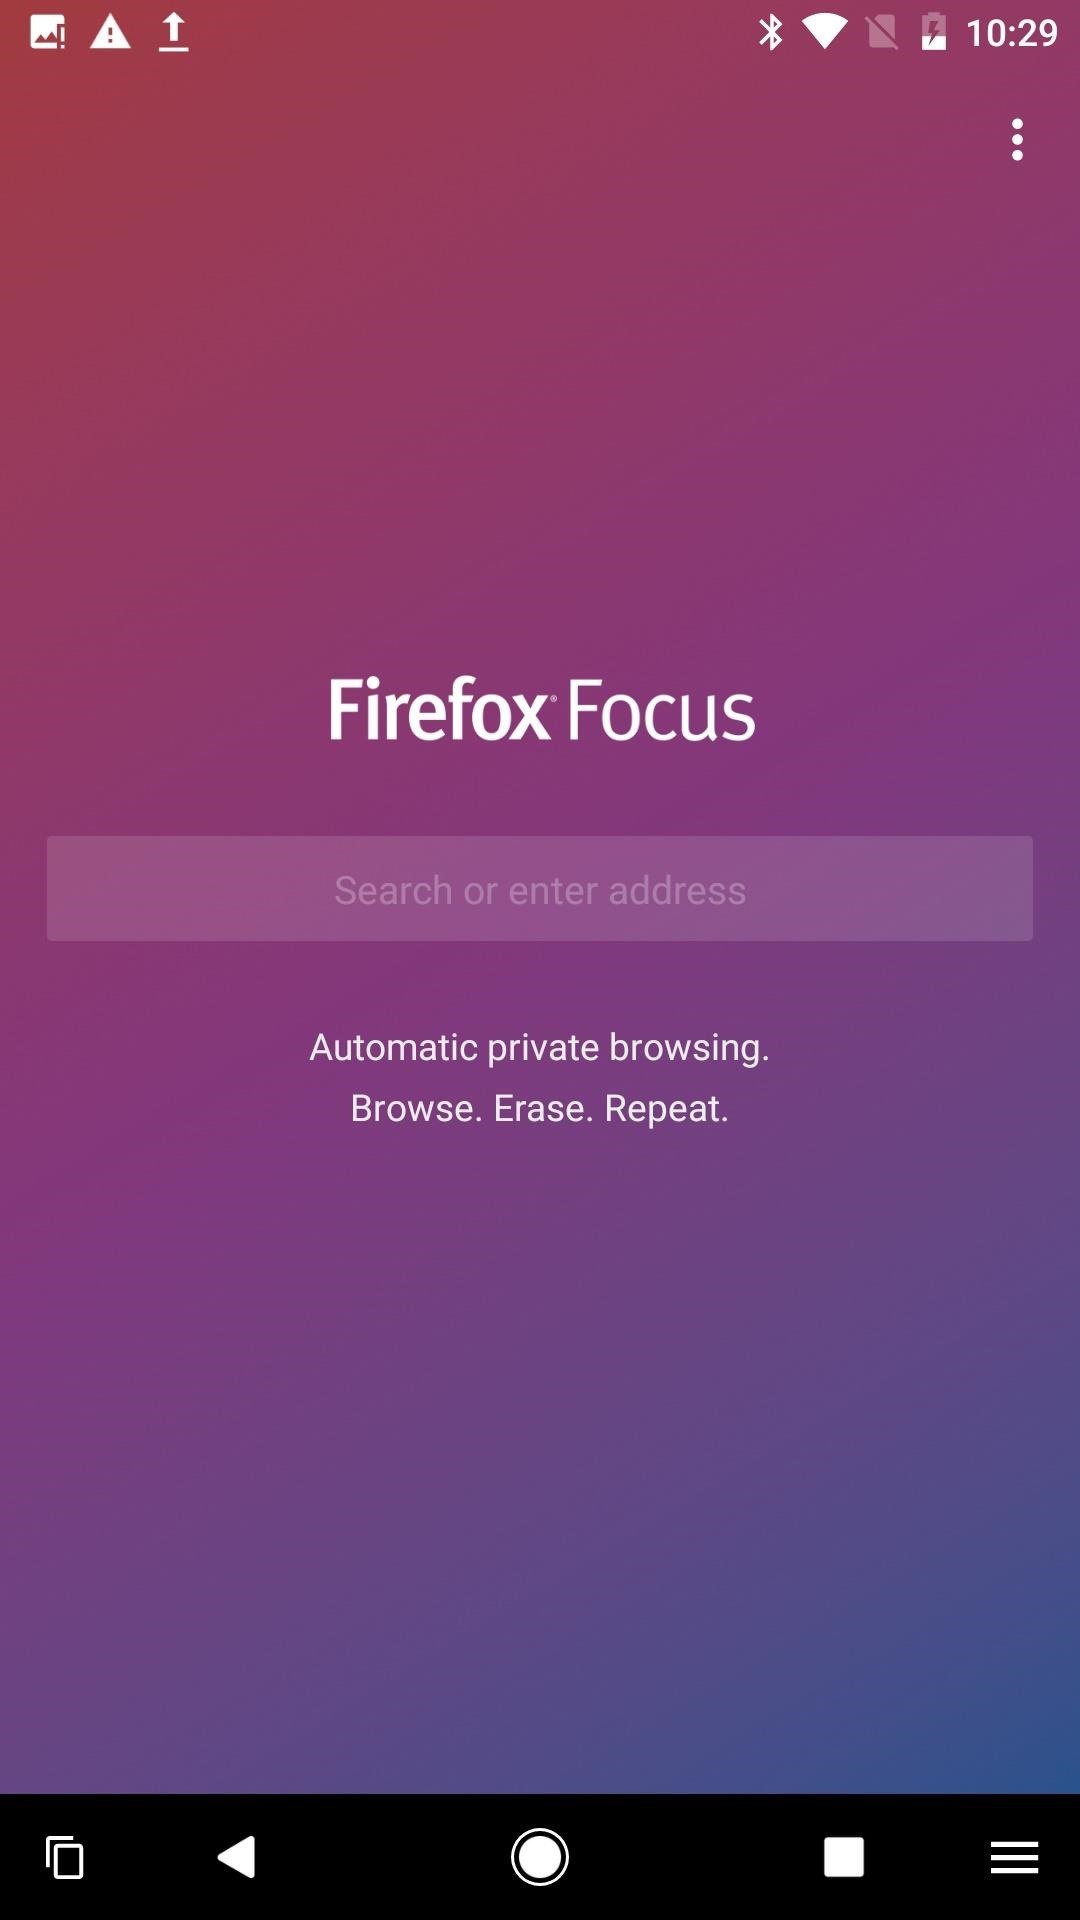 Concerned About Privacy? Firefox Focus Is Here to Save the Day